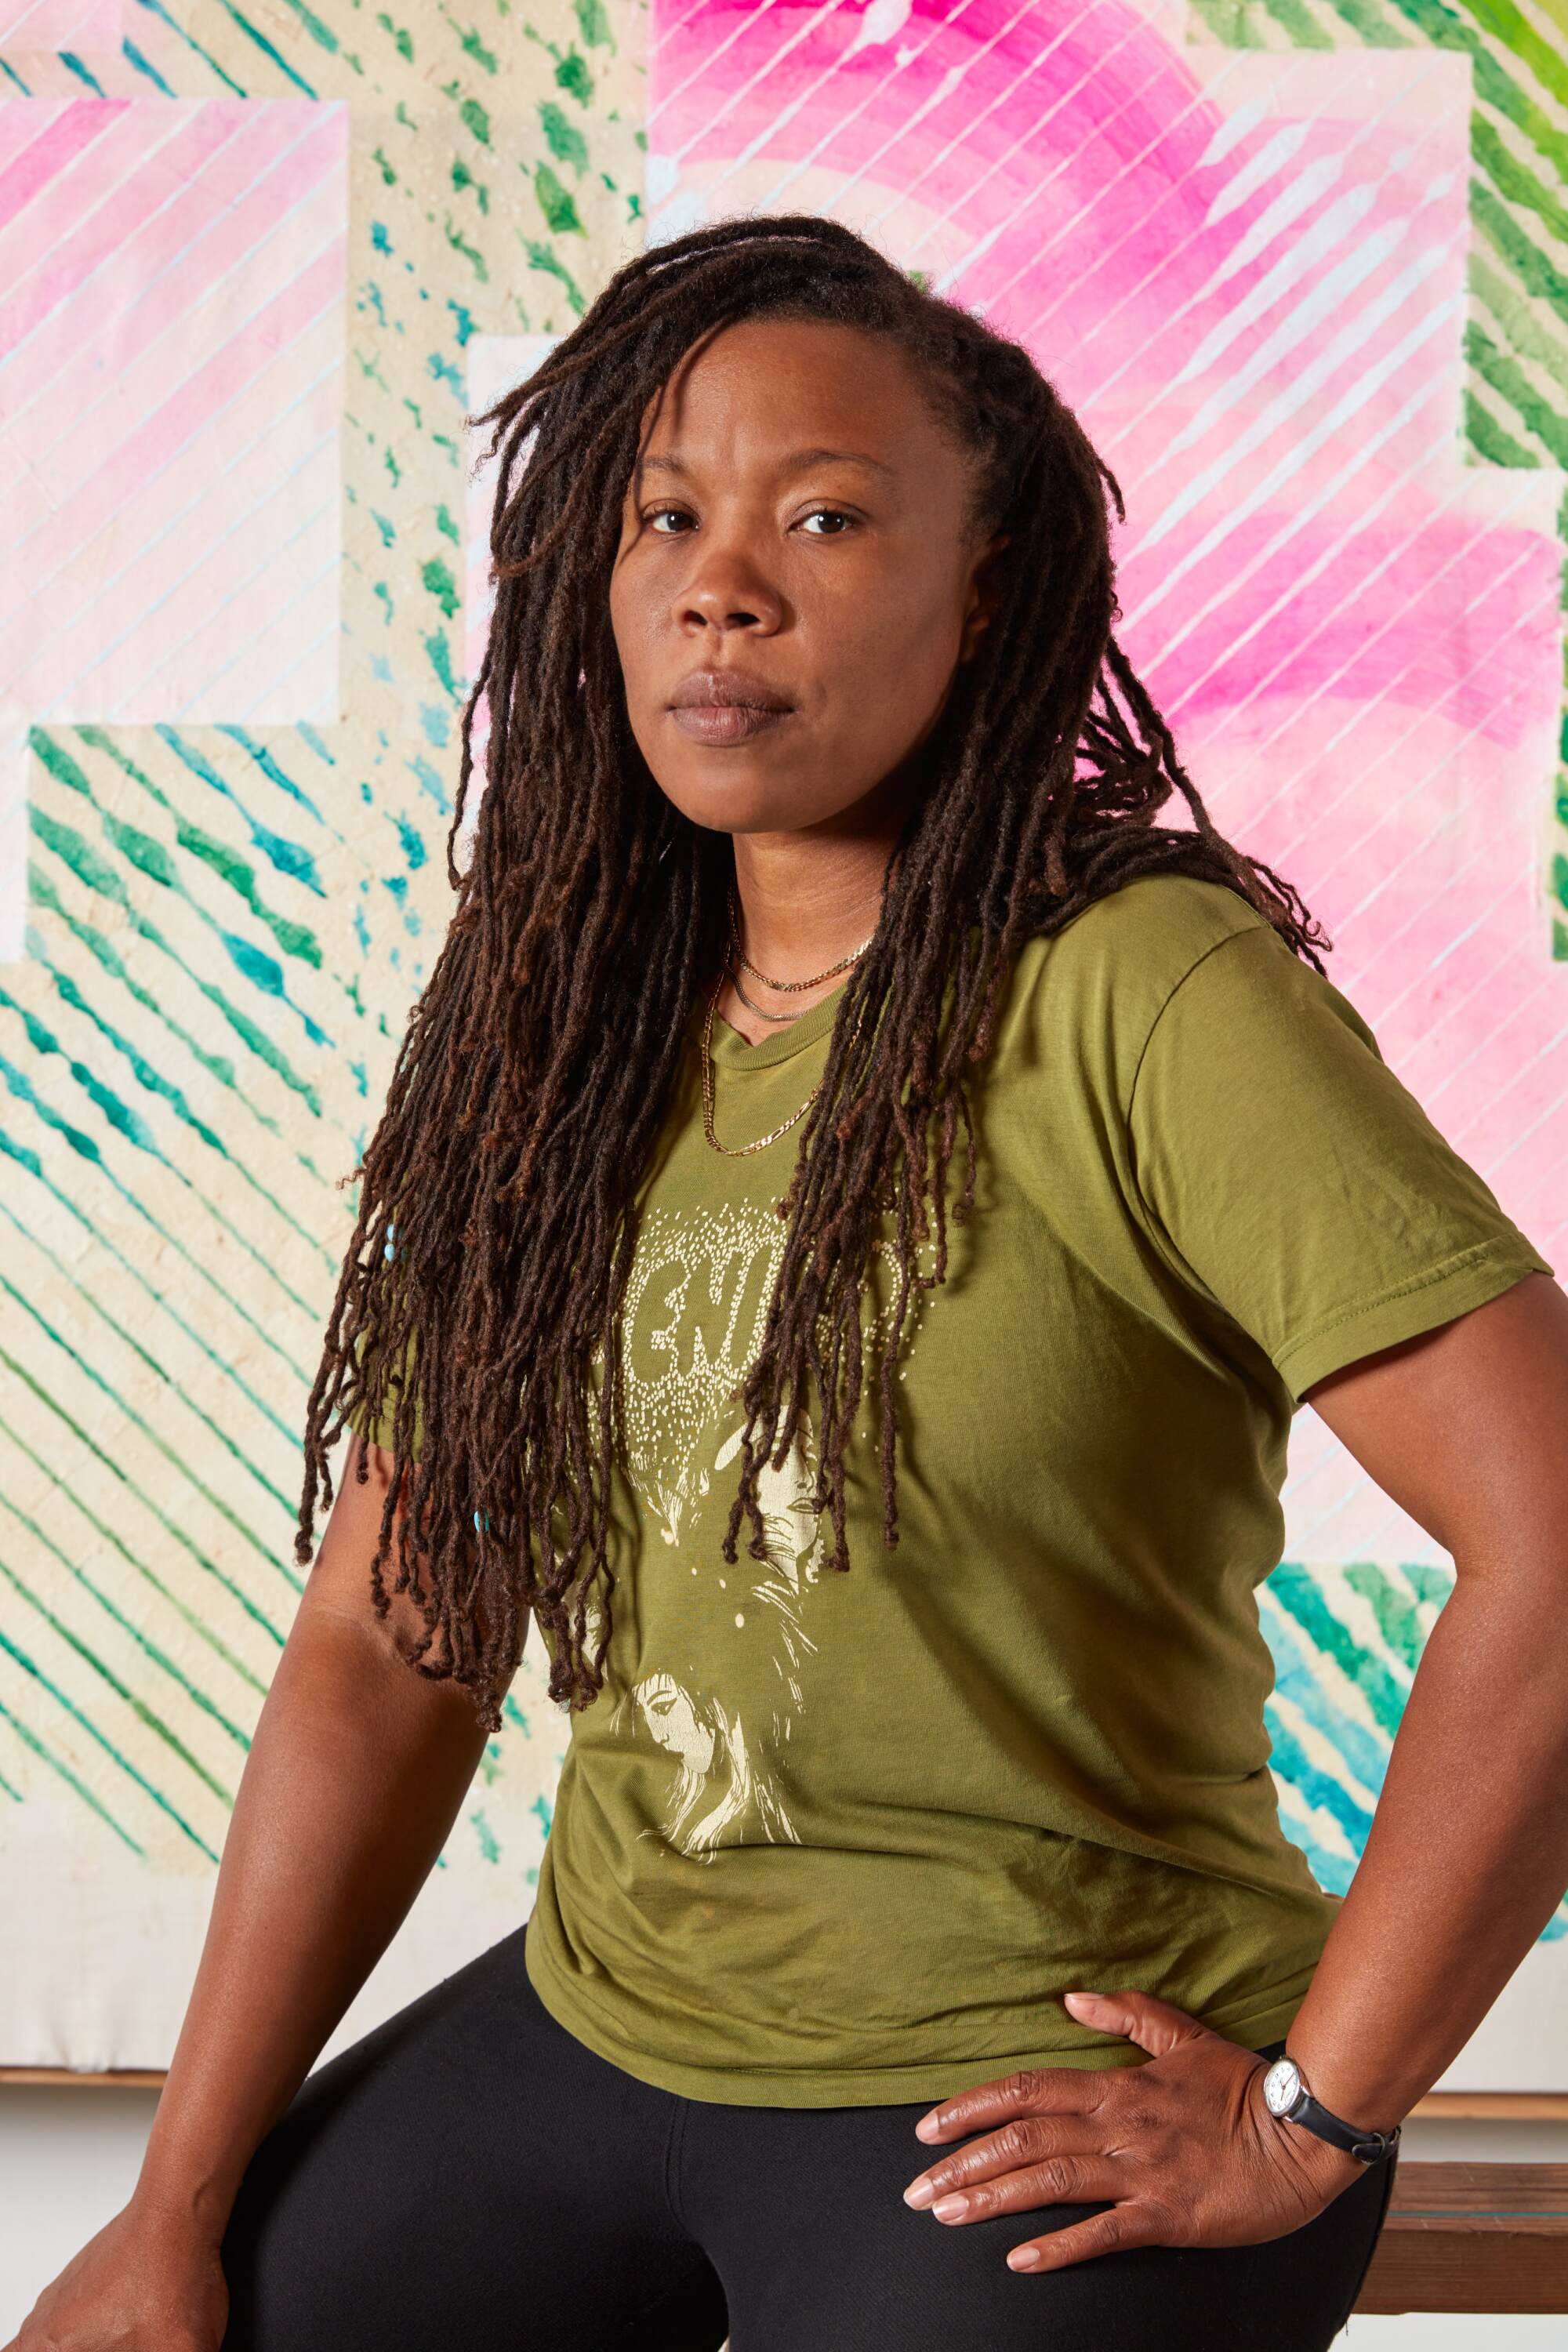 Tomashi Jackson poses in a green T-shirt in front of one of her abstract artworks.